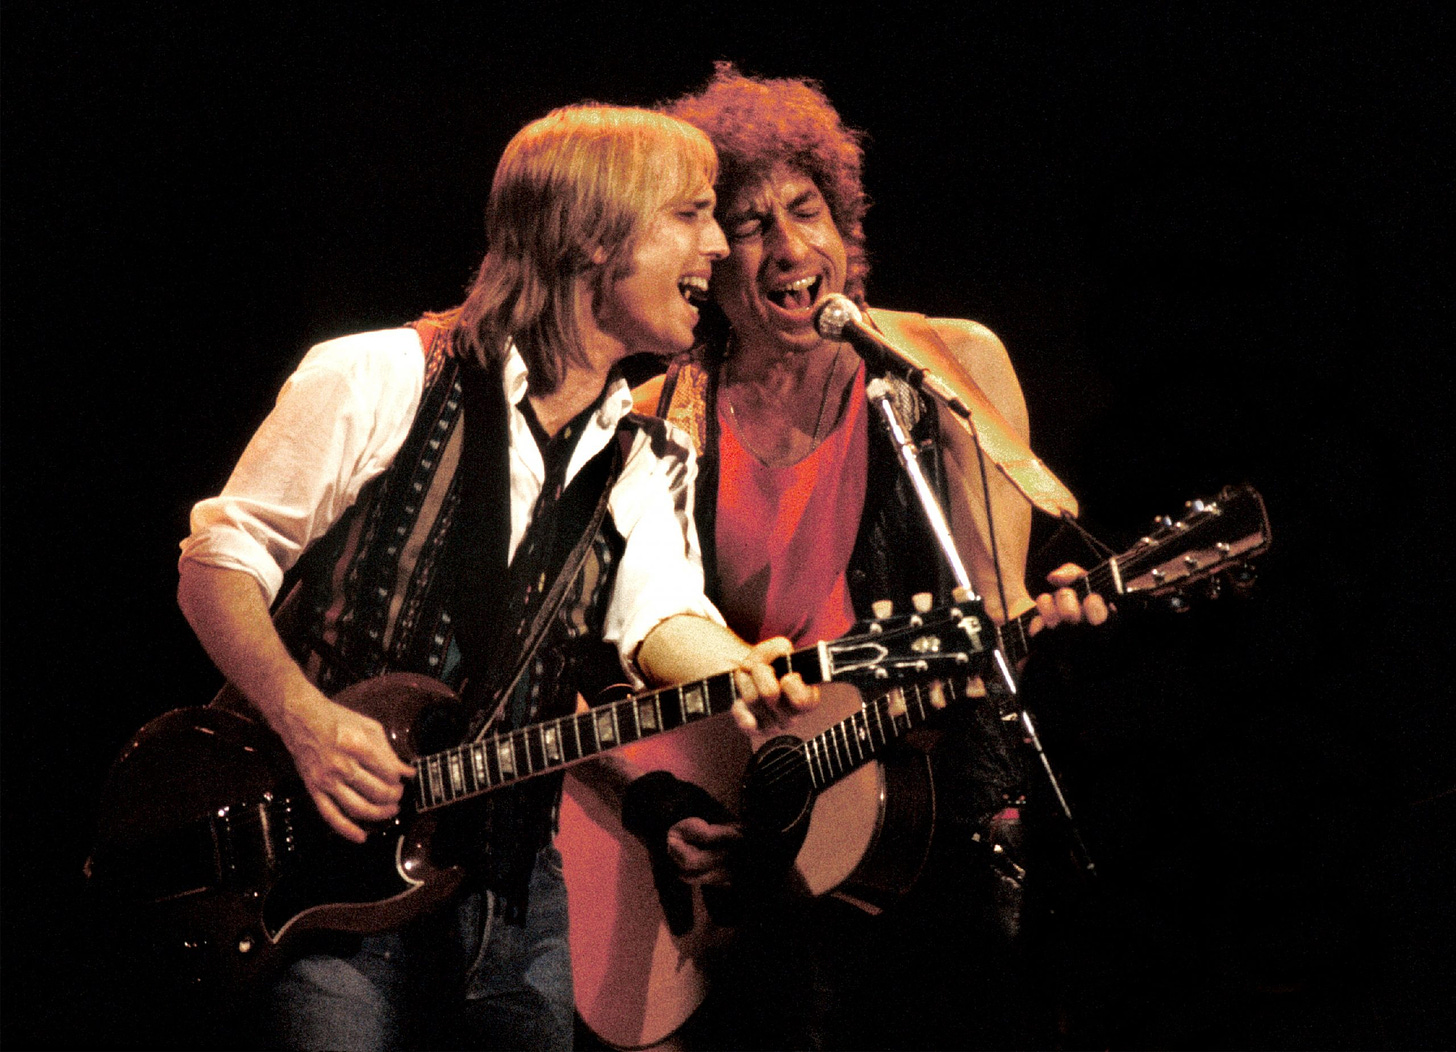 Bob Dylan Never Wanted to Stop Touring With Tom Petty: 'It's Too Good'